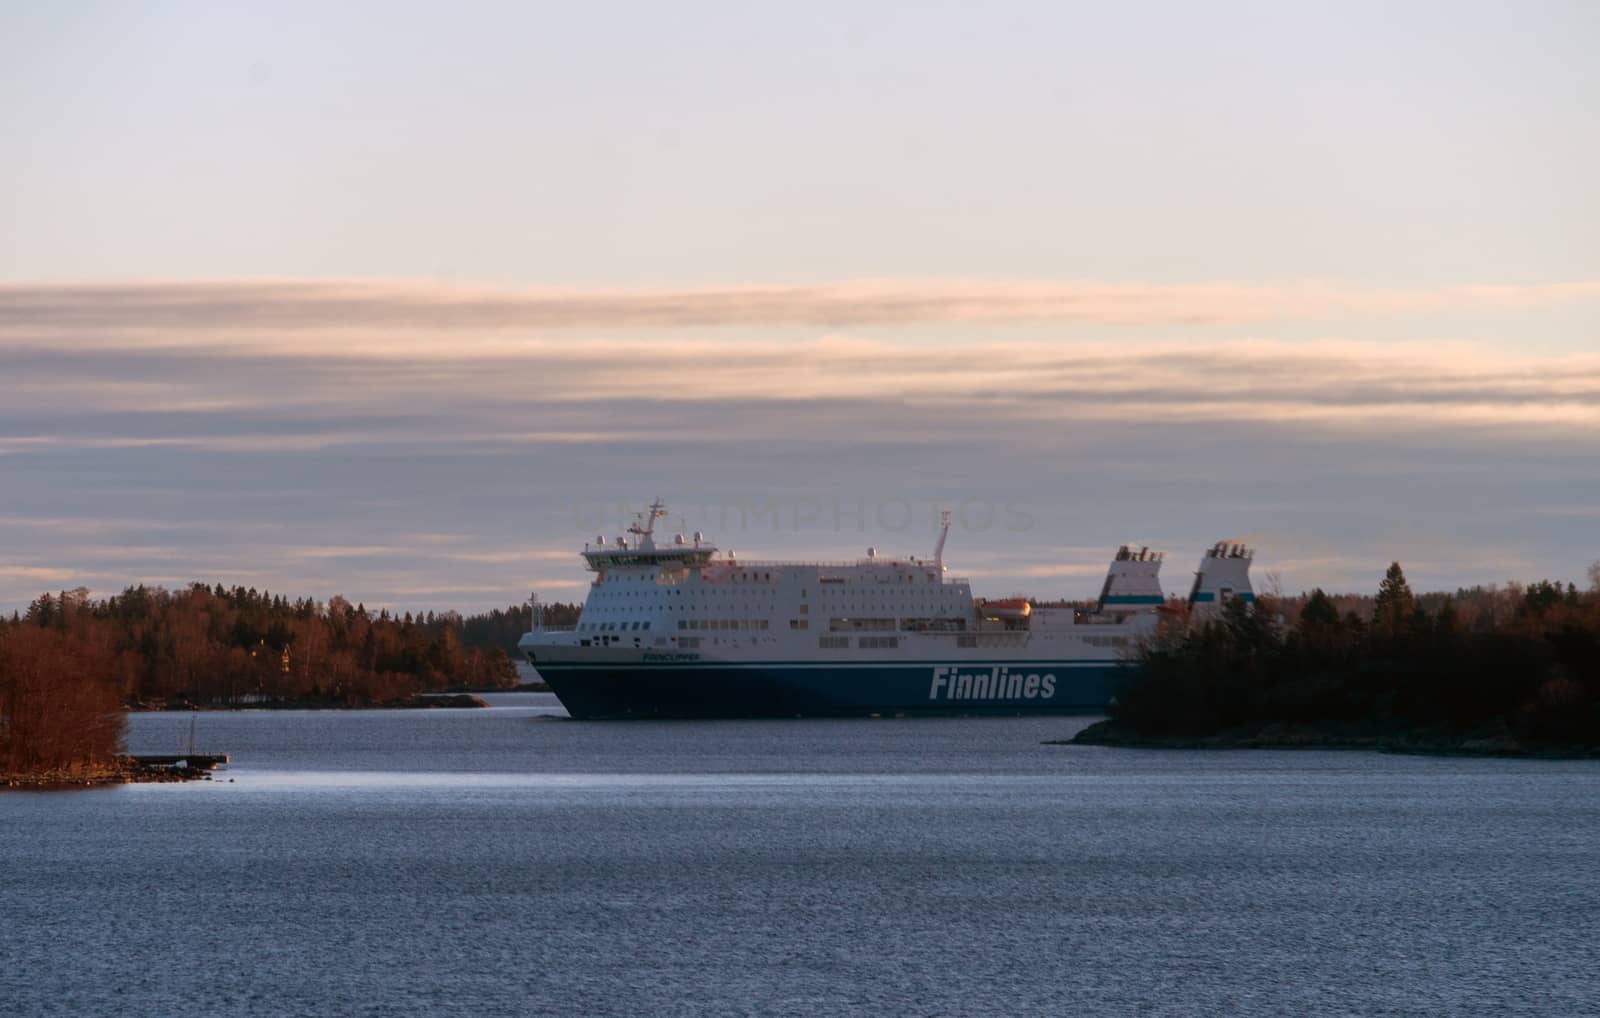 22 April 2019, Stockholm, Sweden. High-speed passenger and car ferry of the Finnish shipping concern FINNLINES Finnclipper equipped with rotary sail in Stockholm skerries.